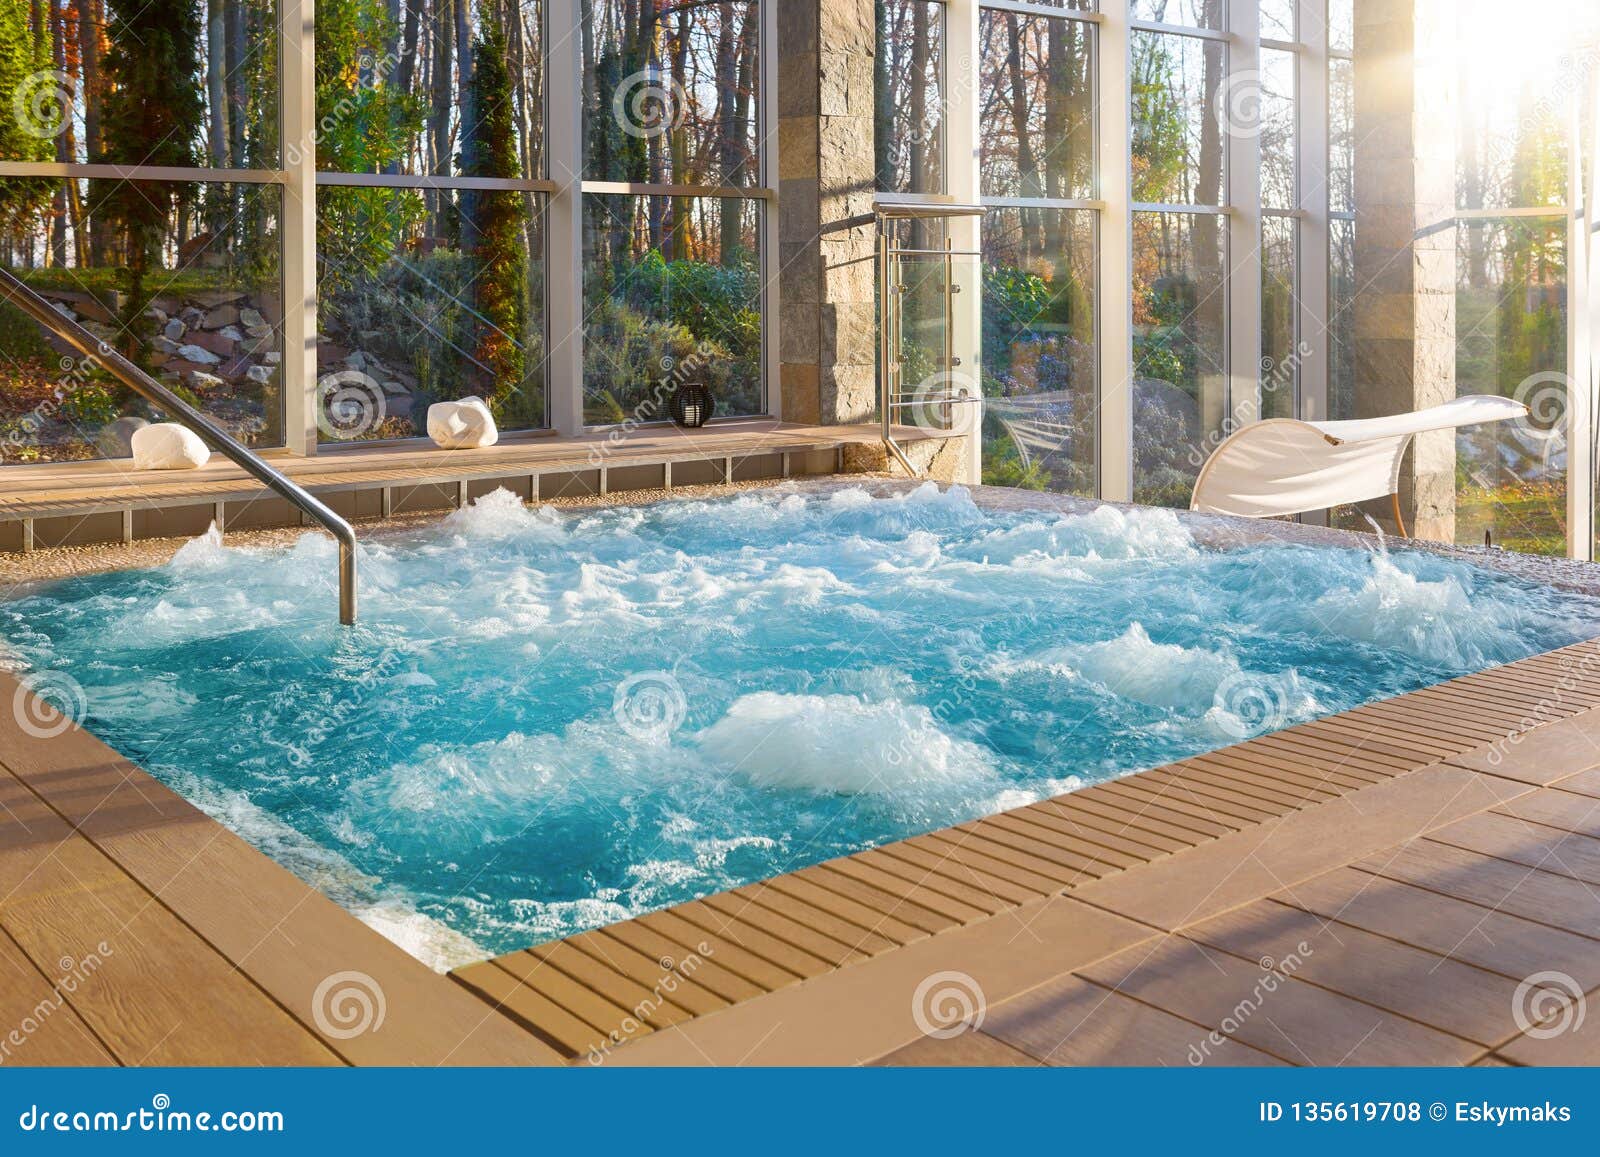 Luxurious Hot Tub Spa With Nature View Stock Photo - Image ...